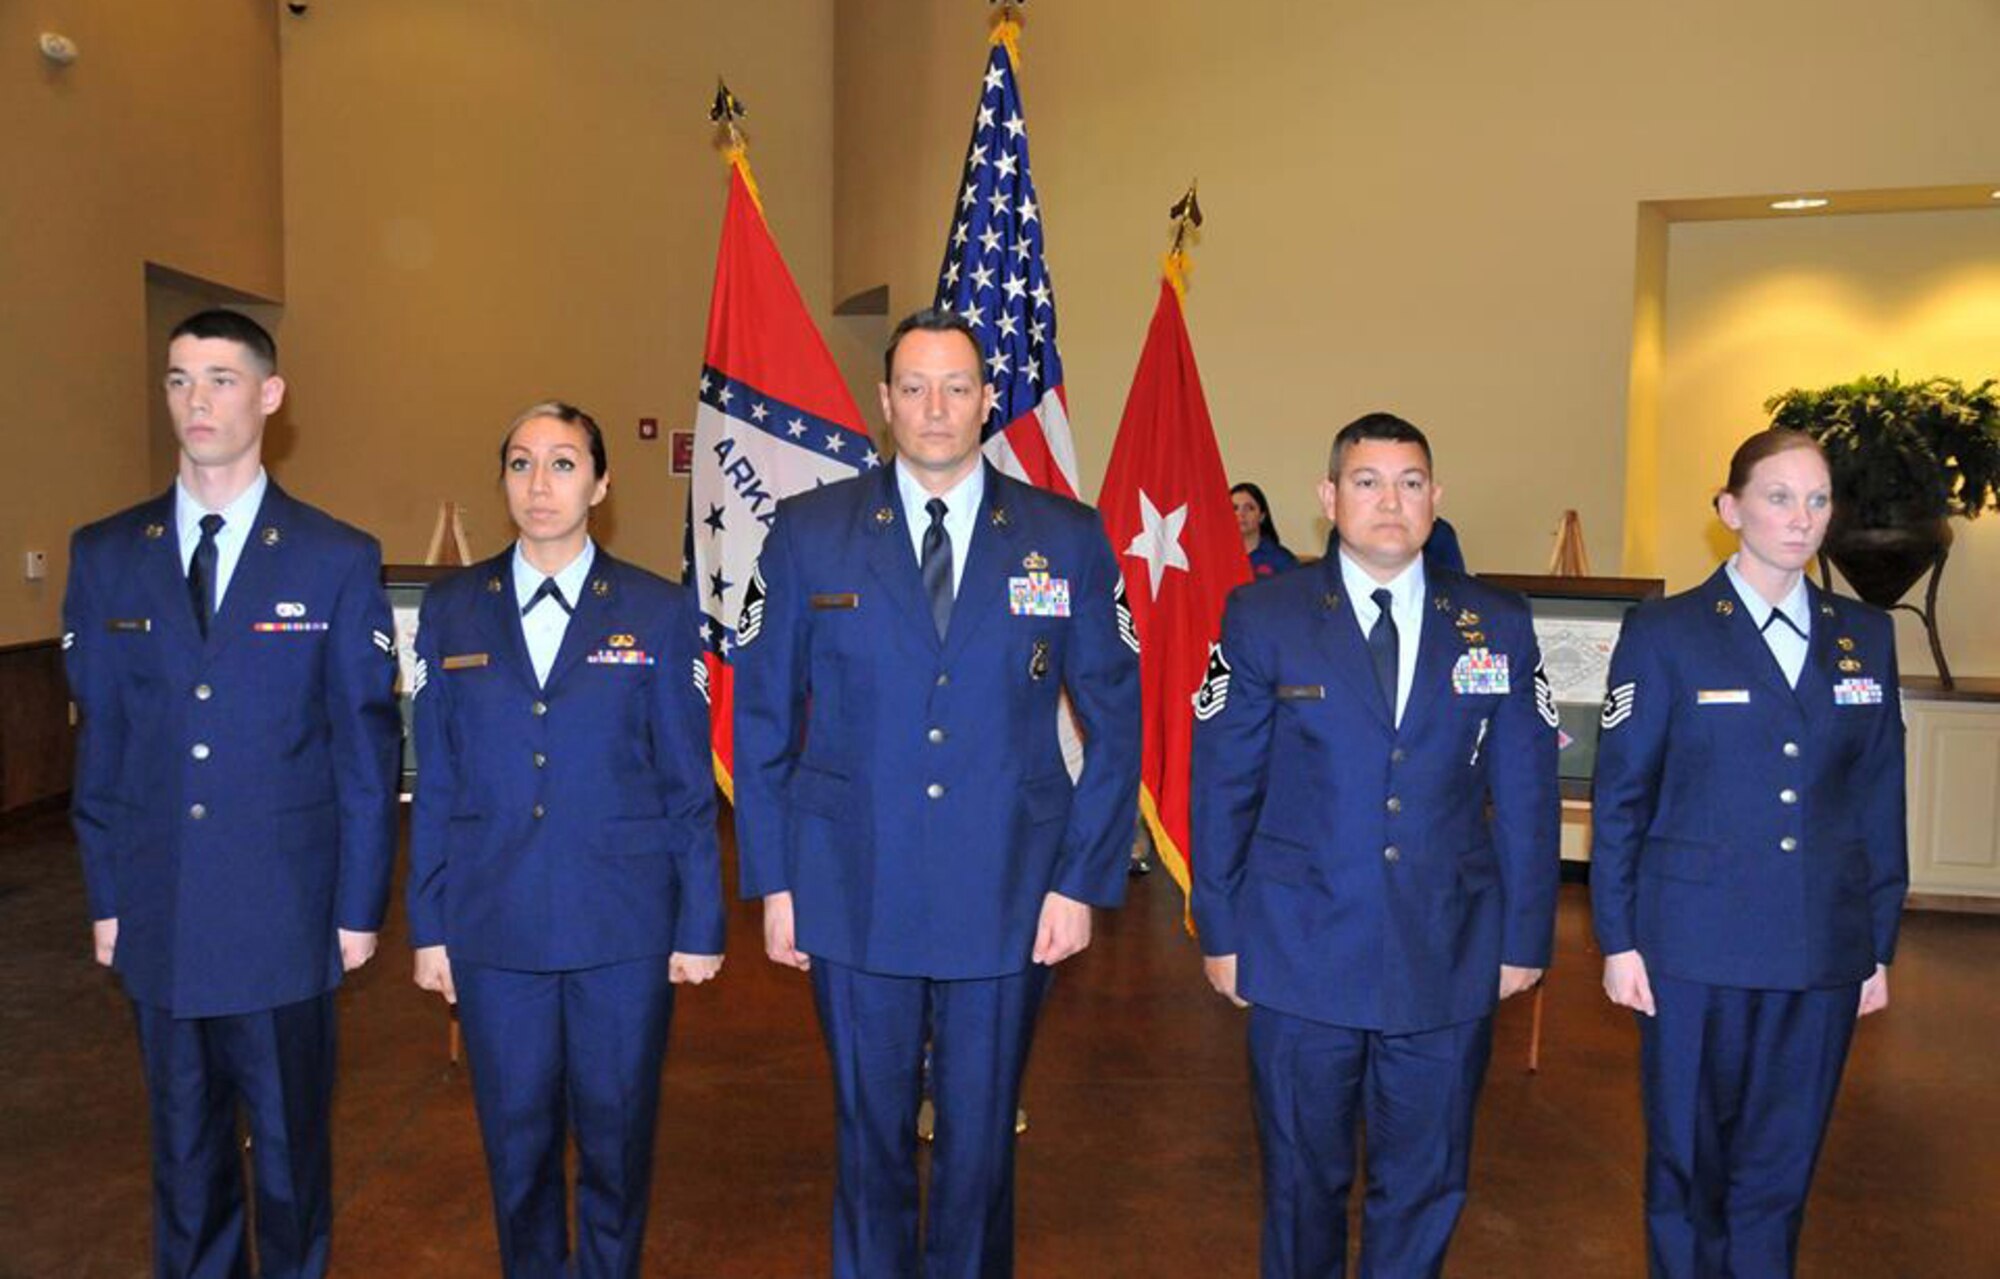 Staff Sgt. Julie Darrough (second from left) of the 188th Communications Flight earned the Arkansas Air National Guard Noncommissioned Officer of the Year and Master Sgt. Brian Anible (second from right) of the 188th Mission Support Group won Arkansas Air National Guard 1st Sergeant of the Year. The winners were recognized during a presentation Feb. 22 at Camp Joseph T. Robinson, Ark. Also pictured from left are Airman of the Year, Airman First Class Trevor Grooms of the 123rd Intelligence Squadron; Senior Noncommissioned Officer of the Year, Senior Master Sgt. Matthew Pfleger of the 189th Security Forces Squadron; and Honor Guard Member of the Year, Tech Sgt. Amber Brown of Arkansas National Guard Joint Force Headquarters. (Courtesy photo)